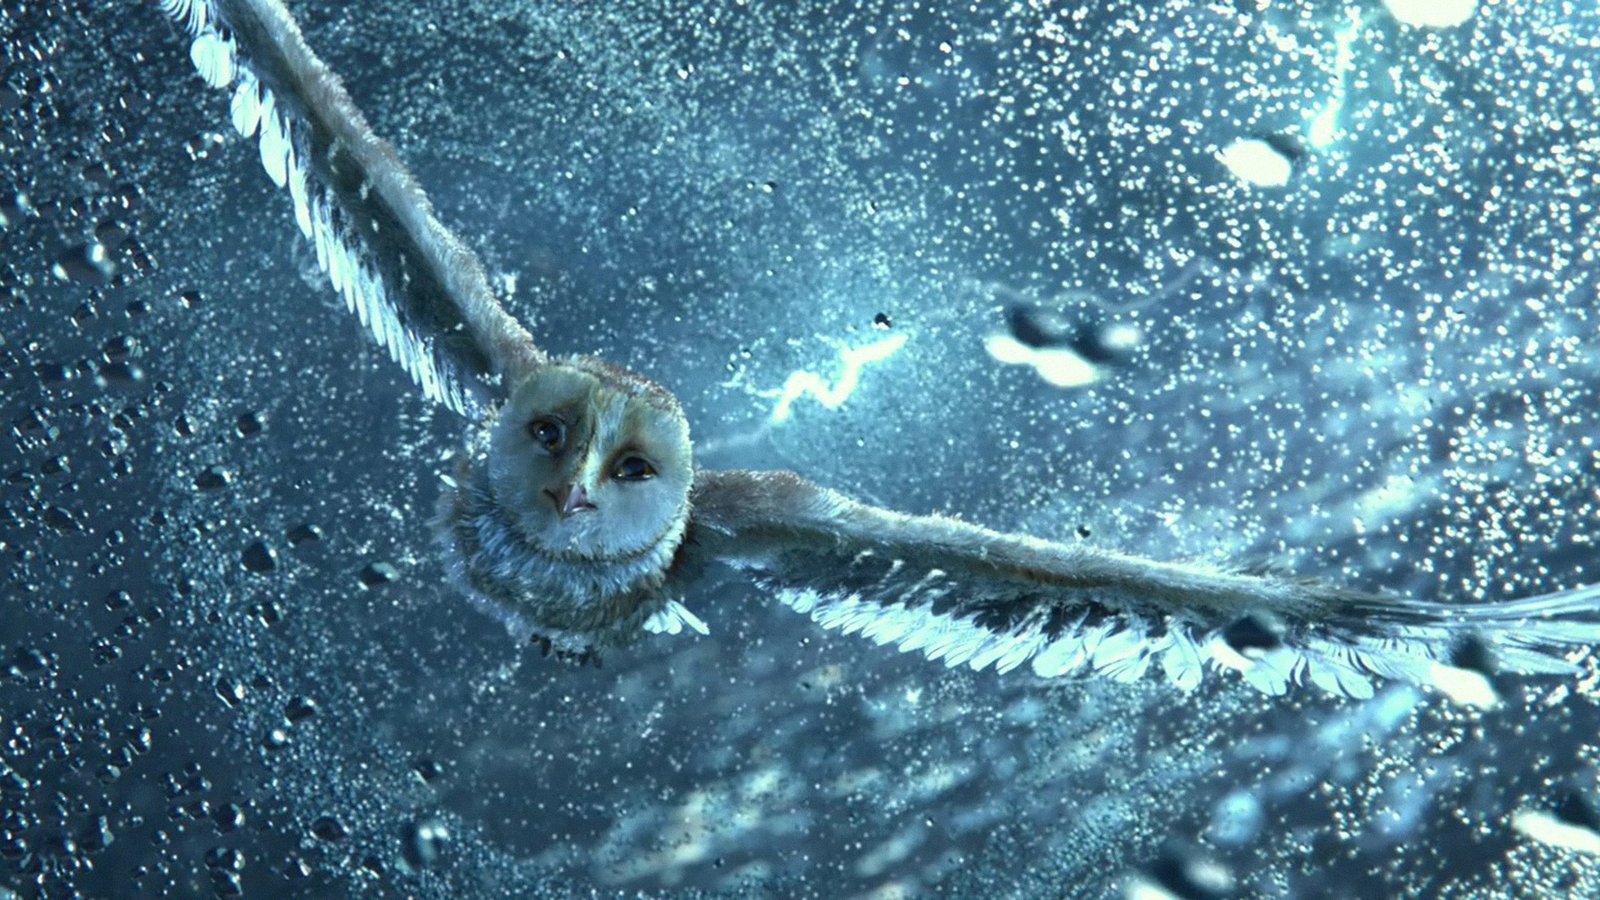  / Legend of the Guardians: The Owls of Ga’Hoole